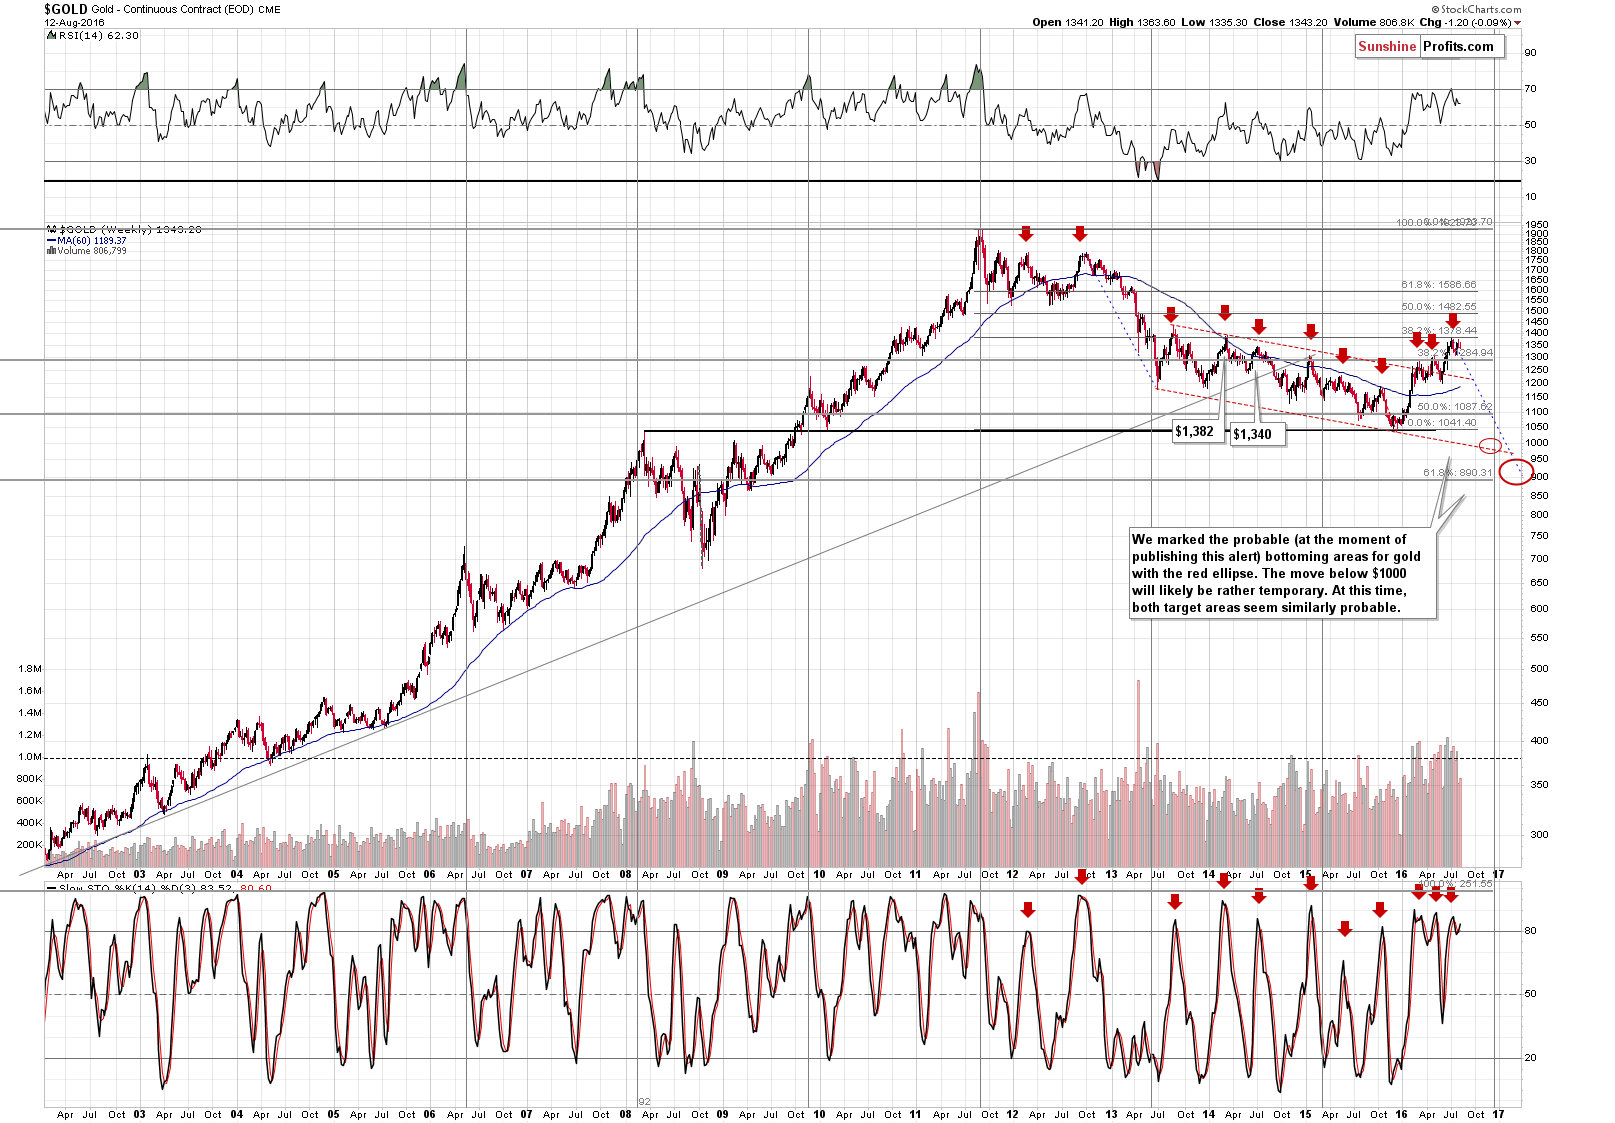 Long-term Gold price chart - Gold spot price